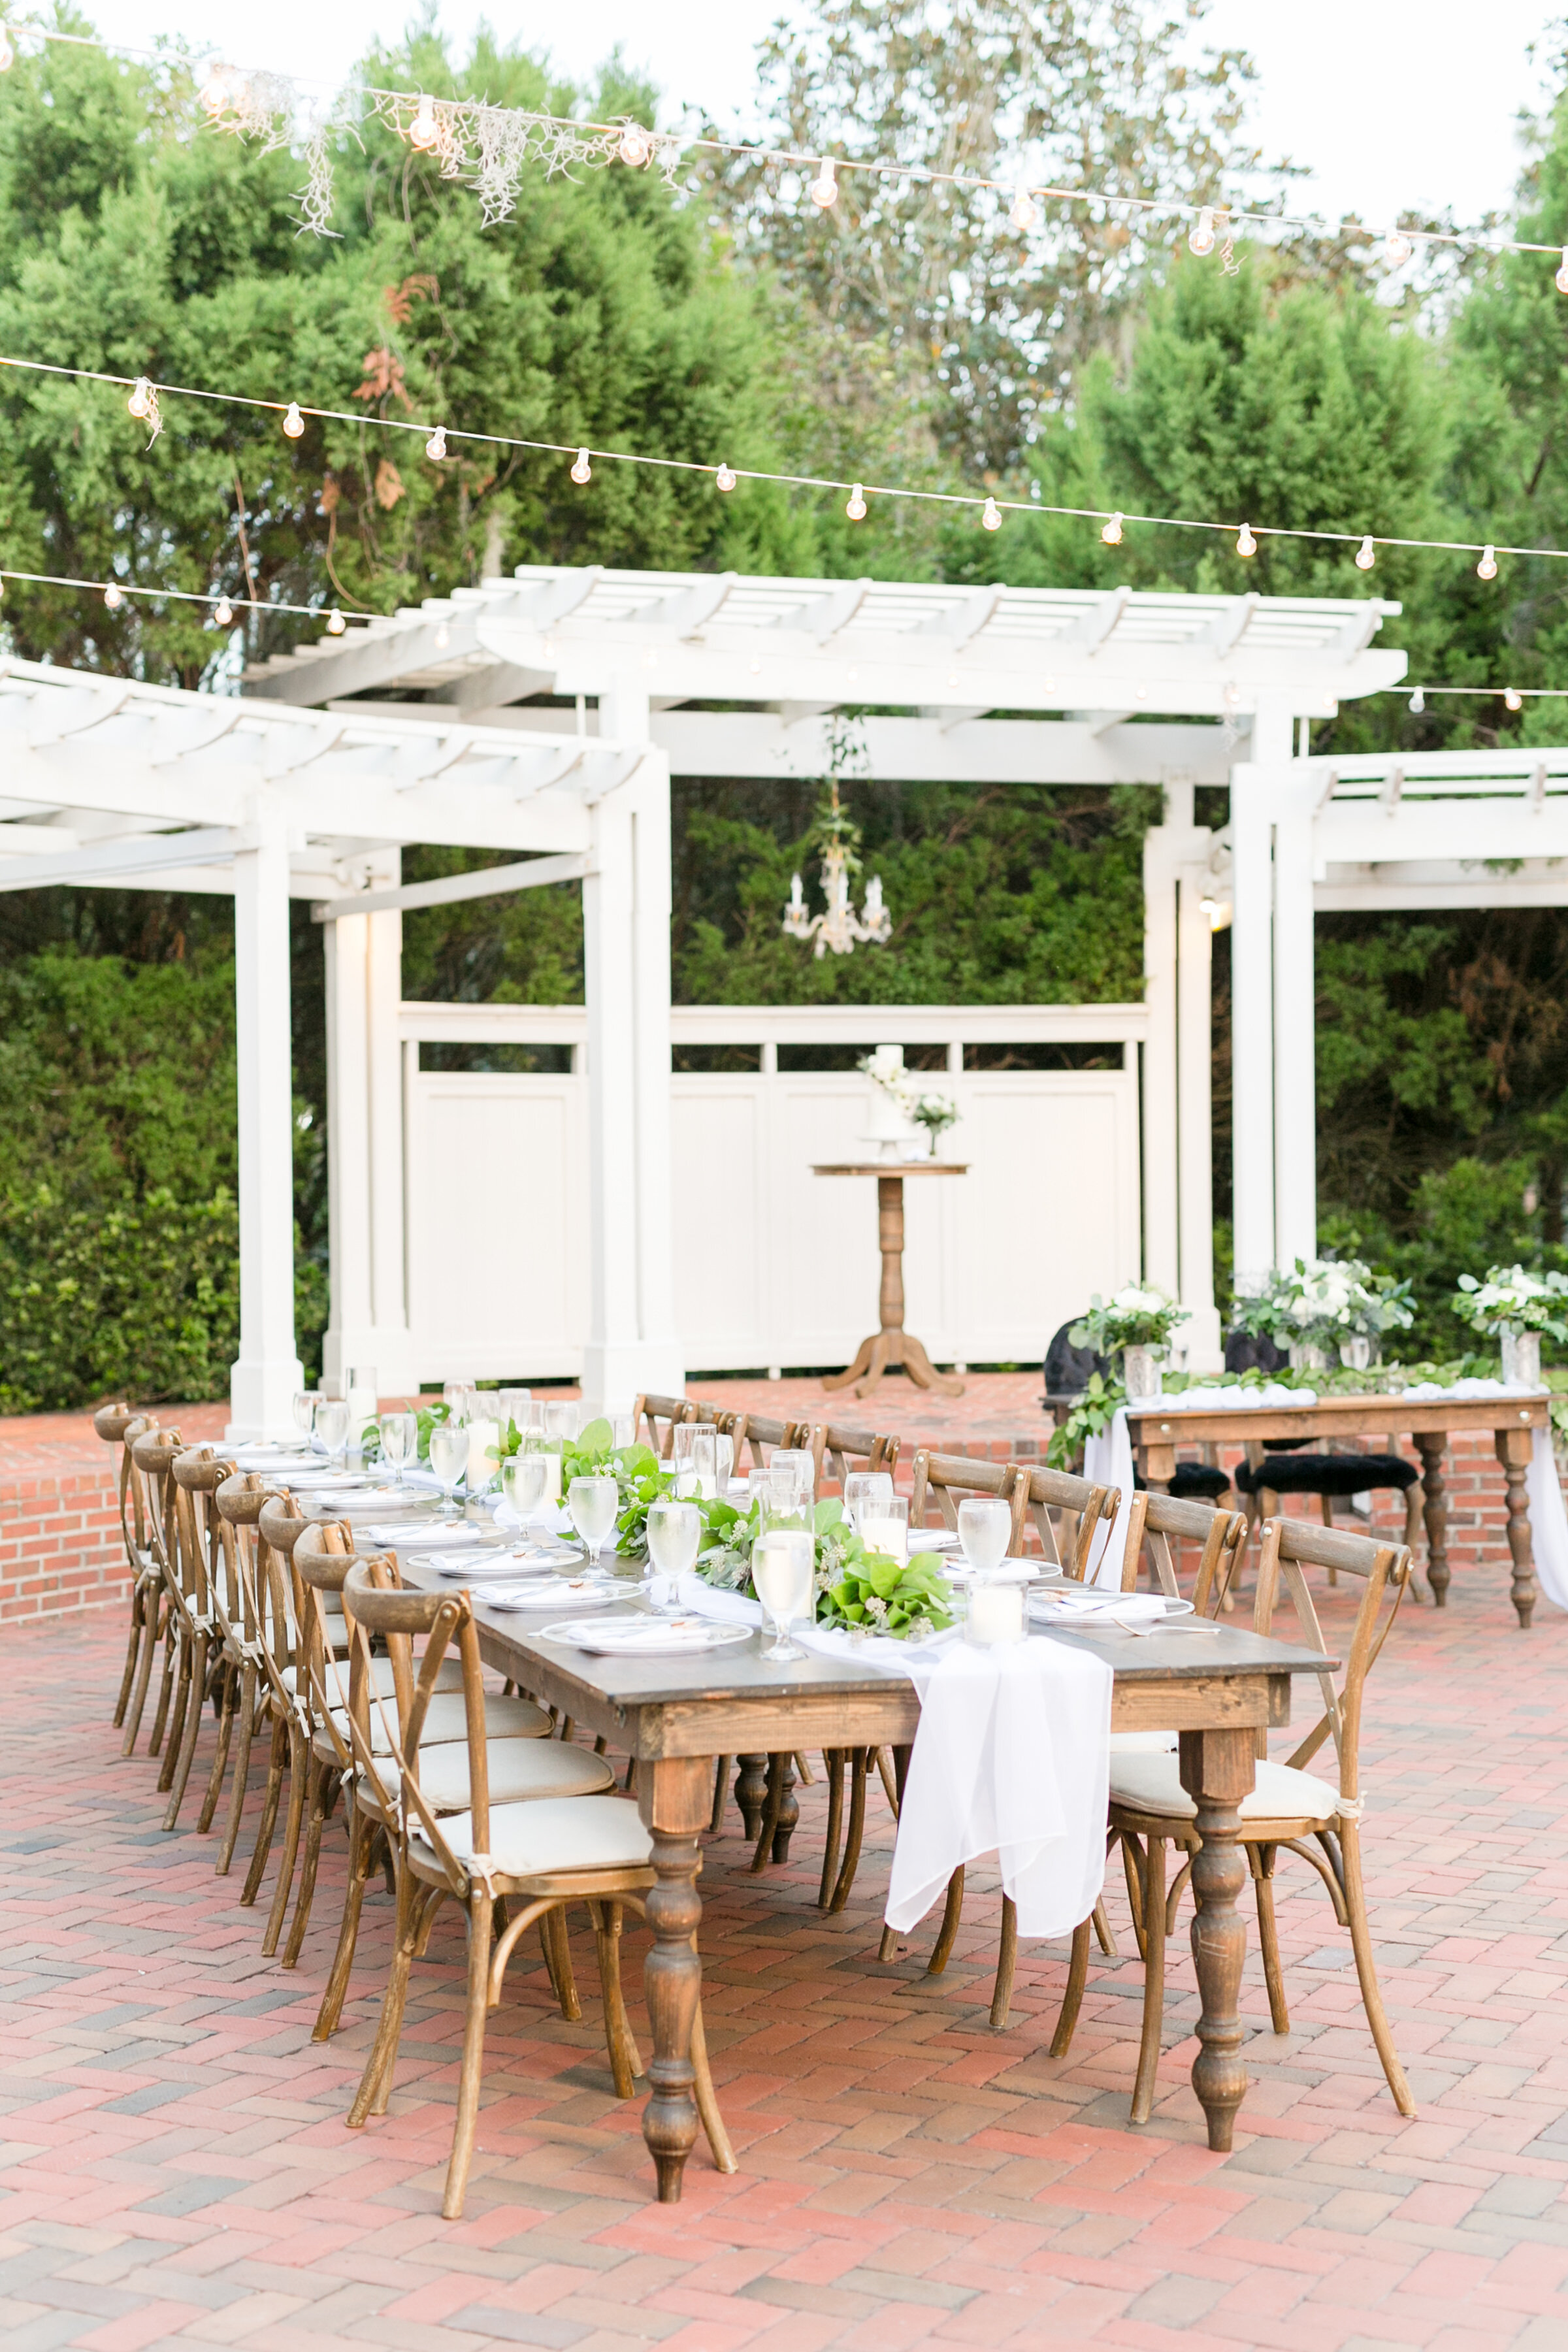 Bluegrass Chic - Black and White Wedding garland on farm tables with candles